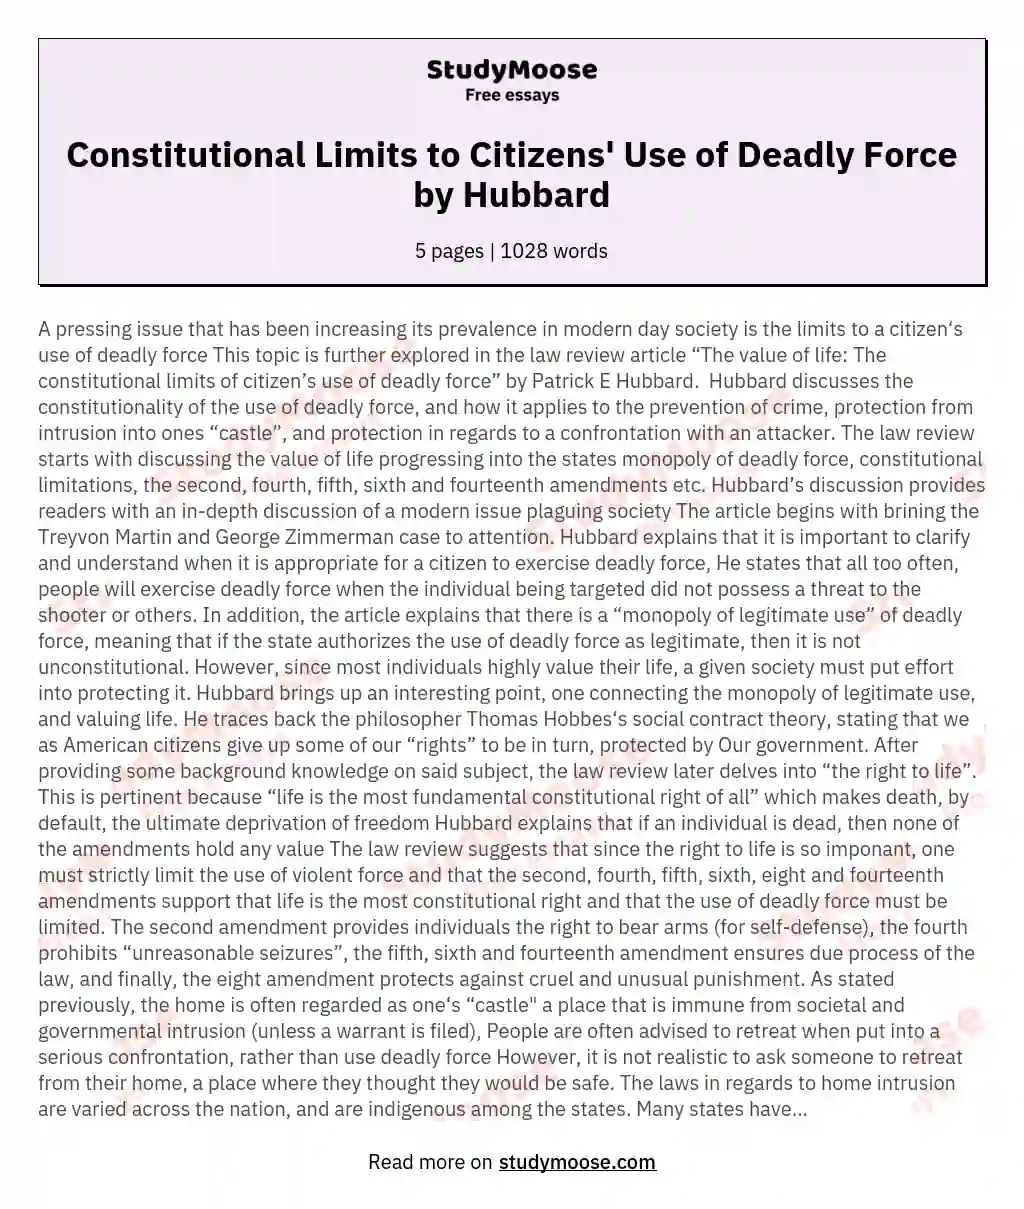 Constitutional Limits to Citizens' Use of Deadly Force by Hubbard essay